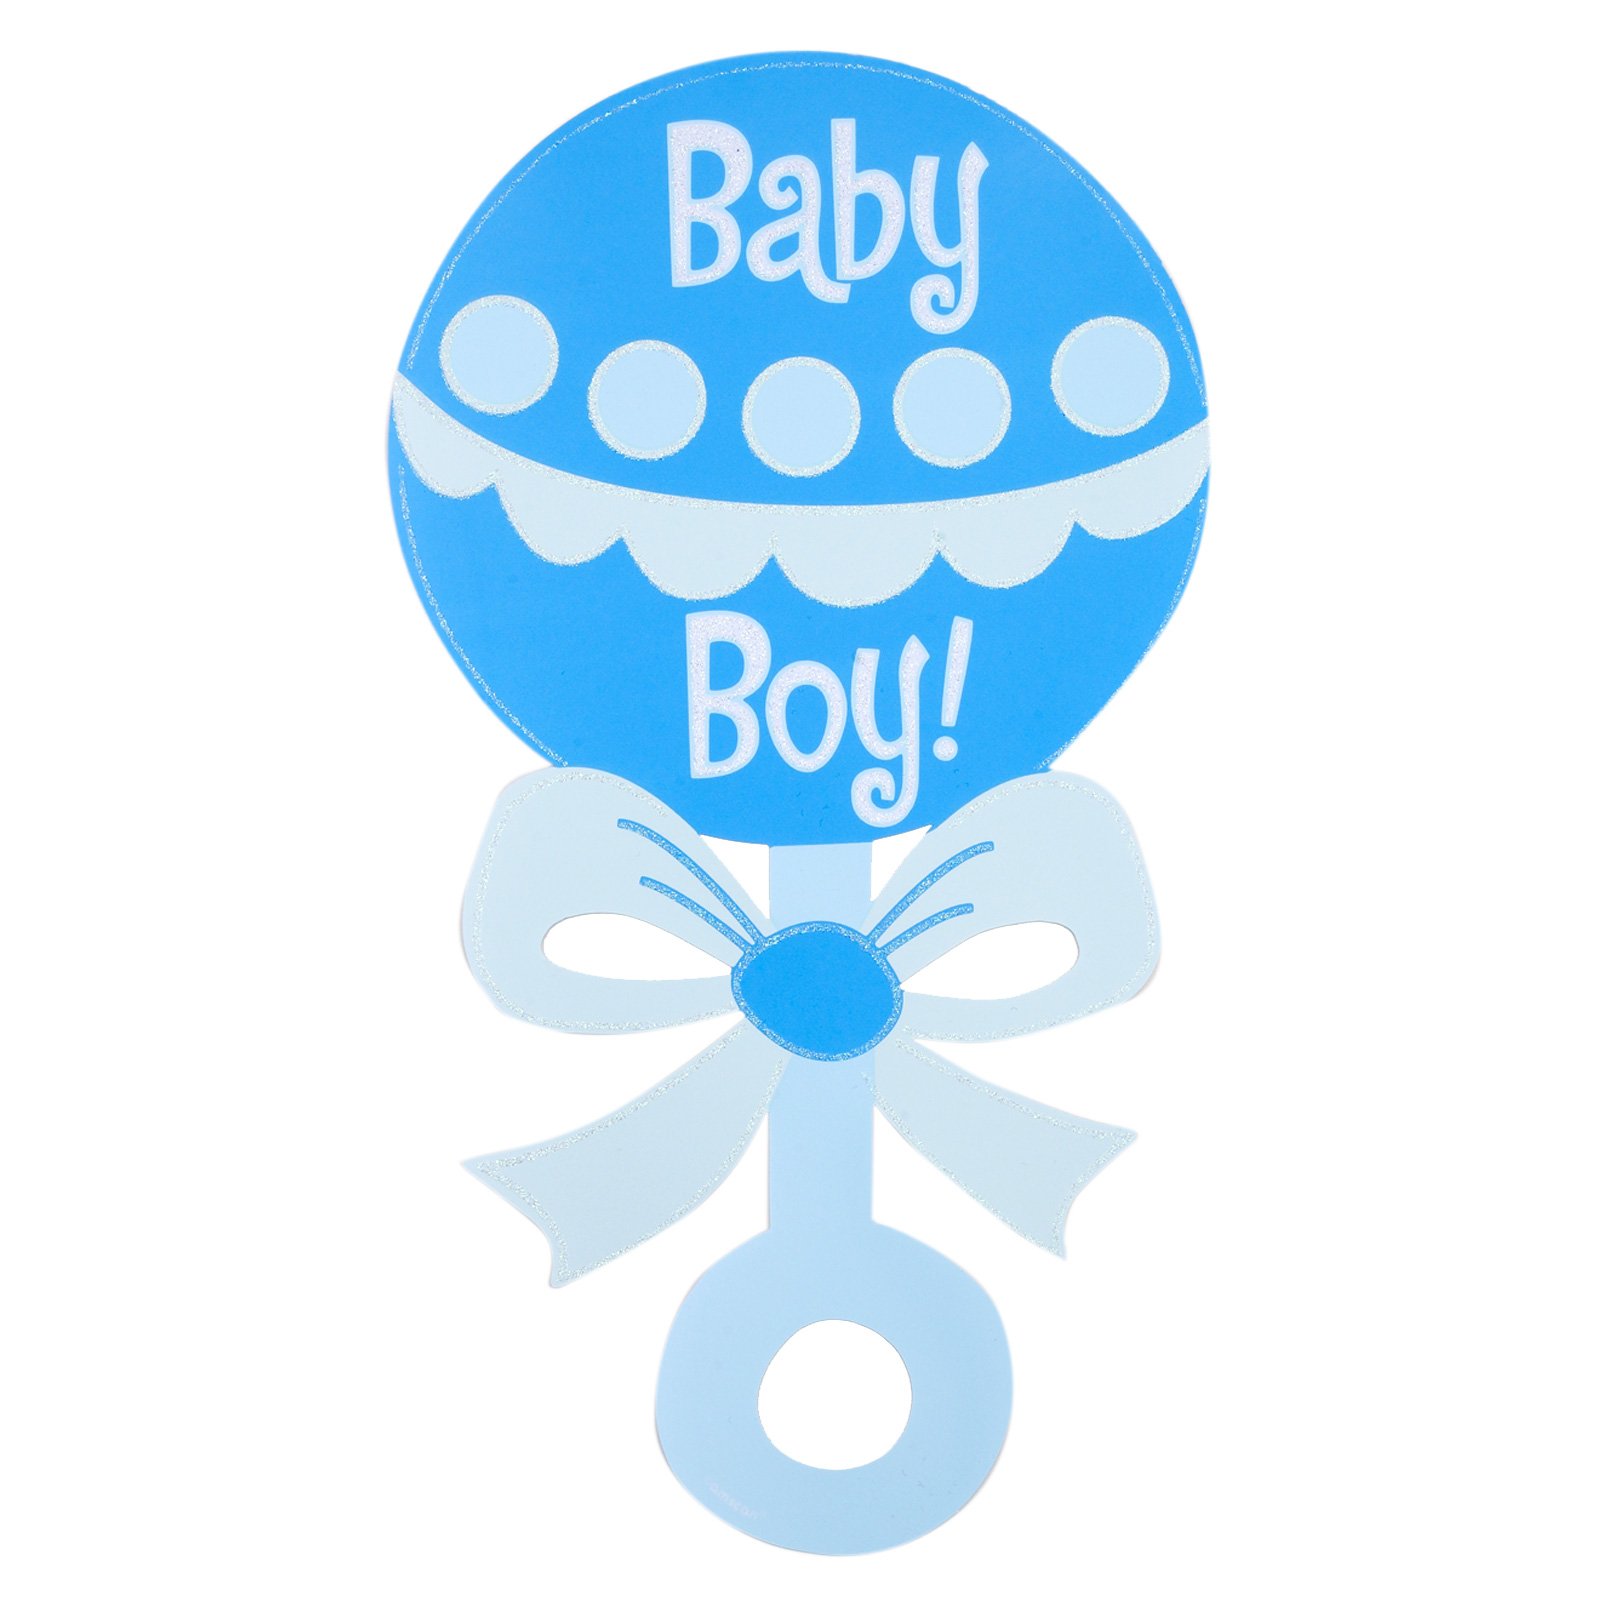 baby shower on Clipart librar